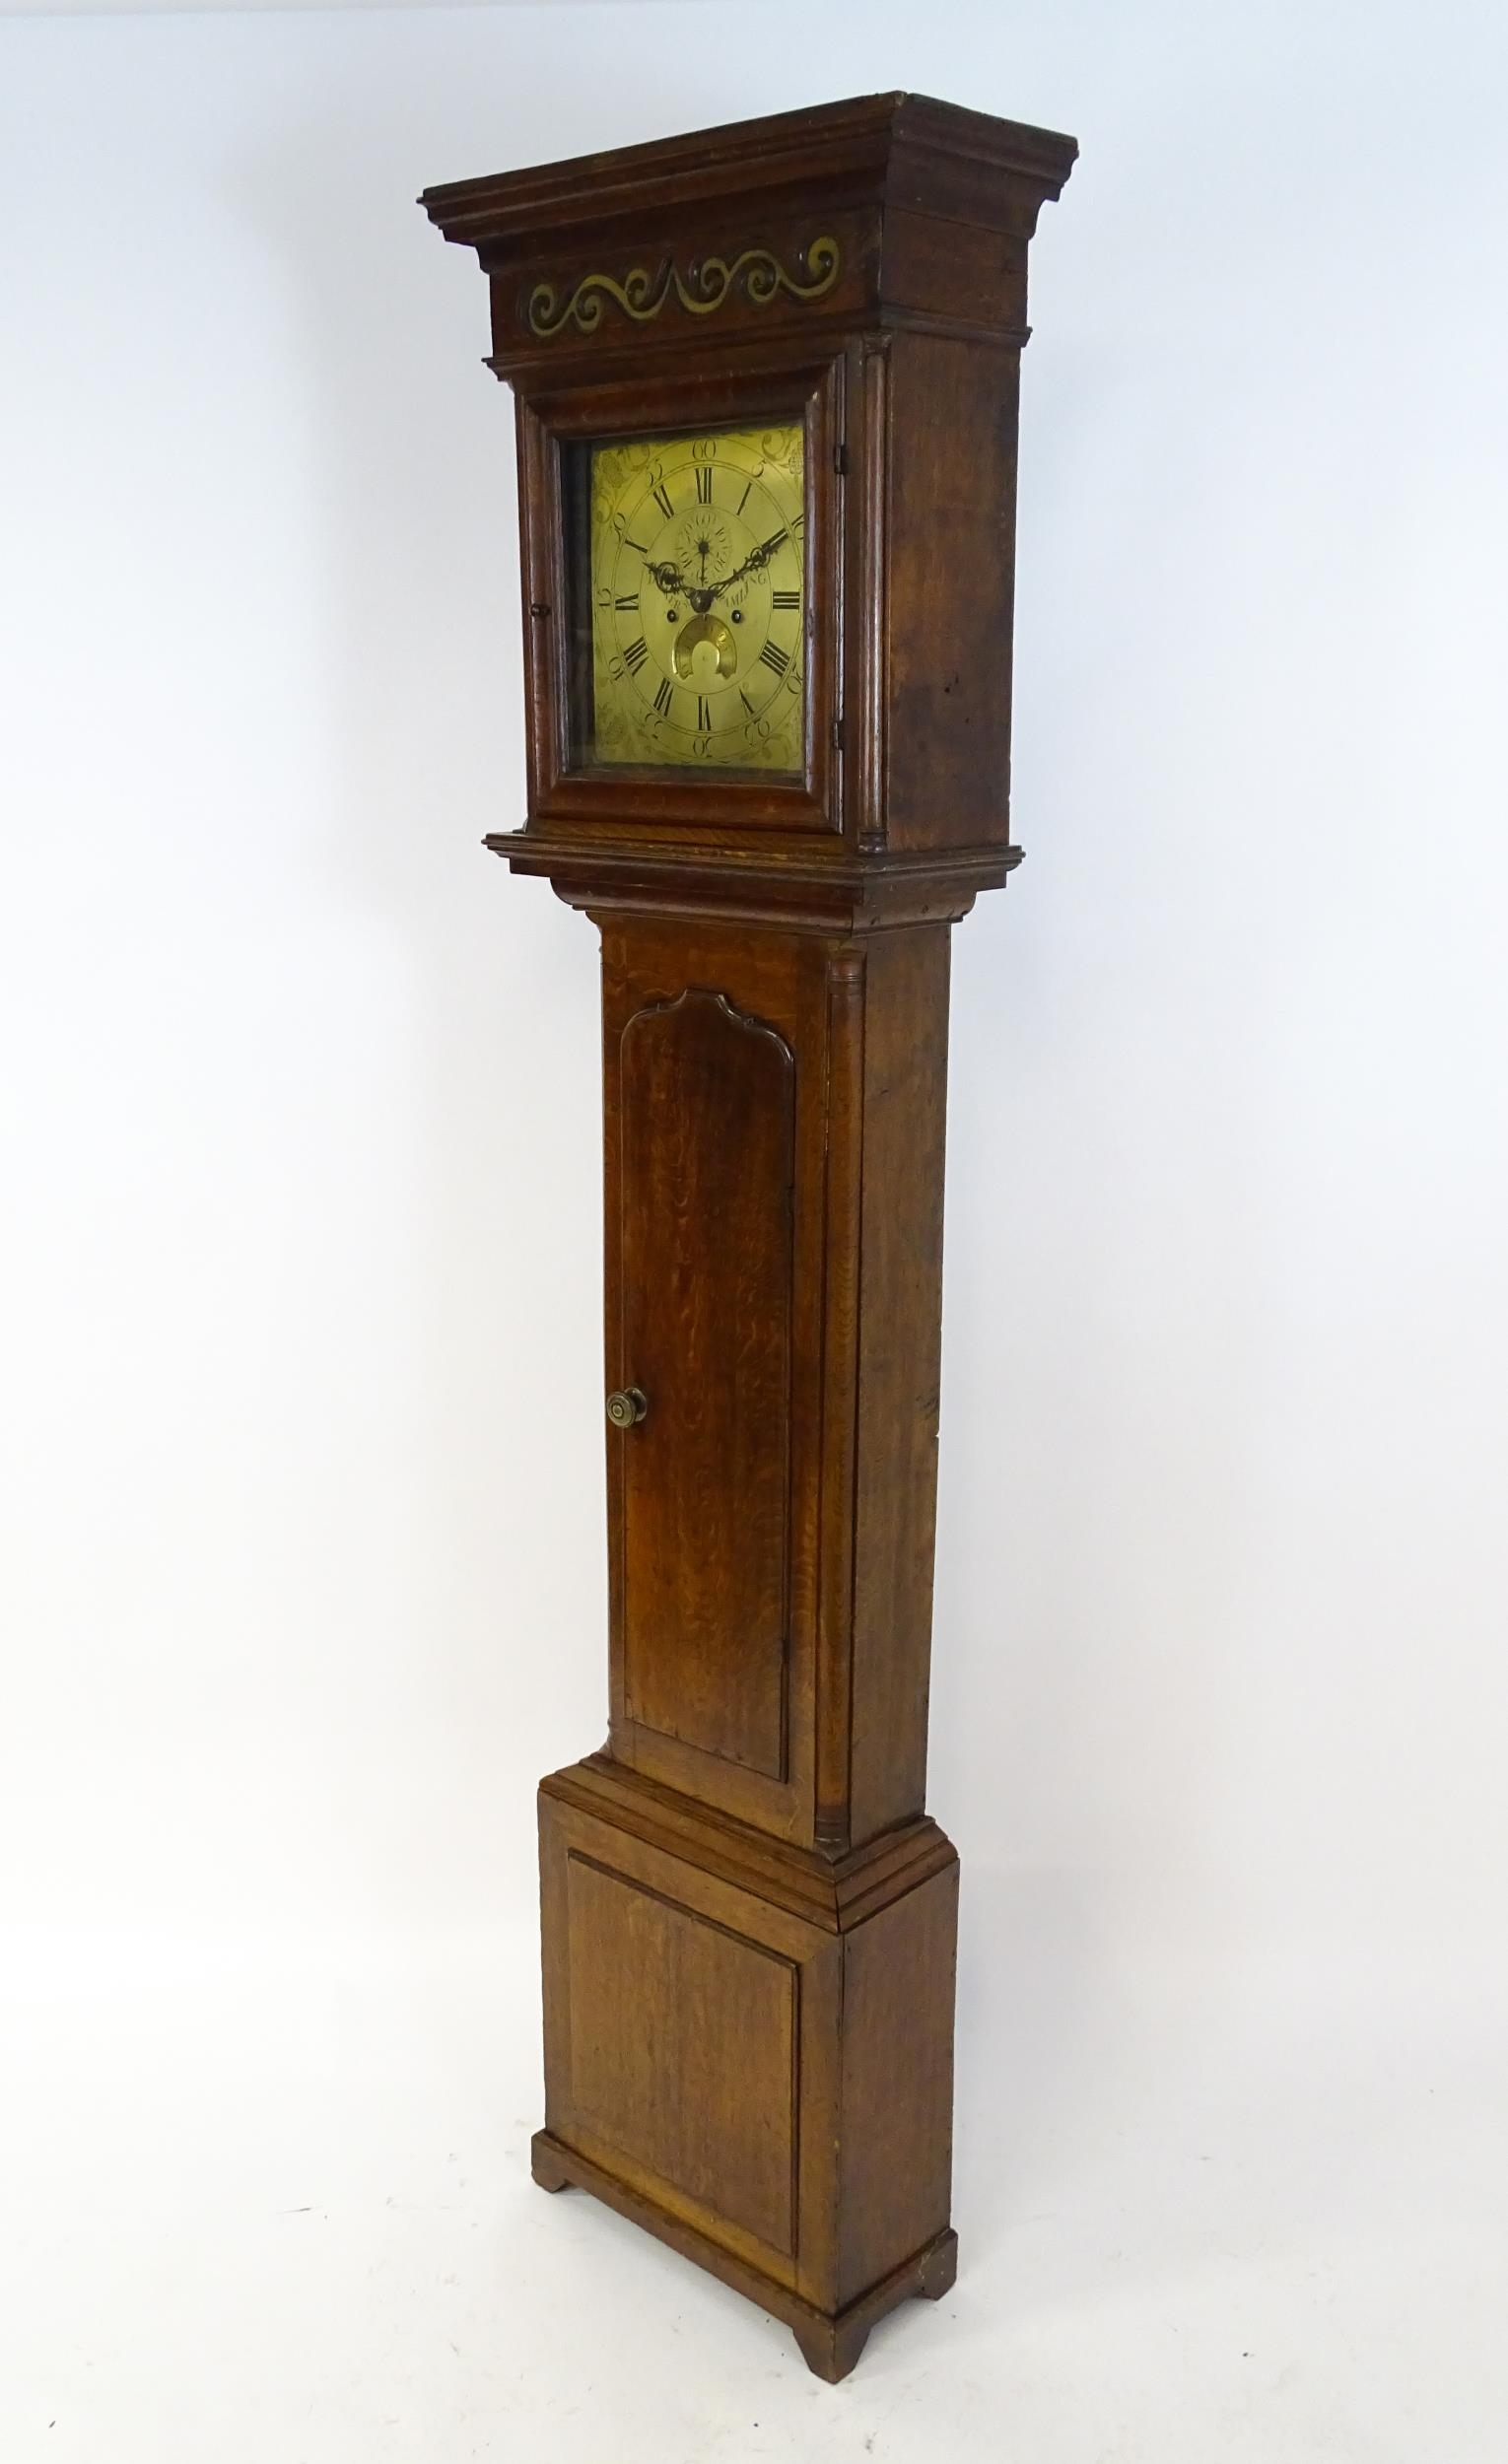 Dickerson, Framlingham : An oak cased 8-day longcase clock with brass face having Roman numerals and - Image 4 of 14